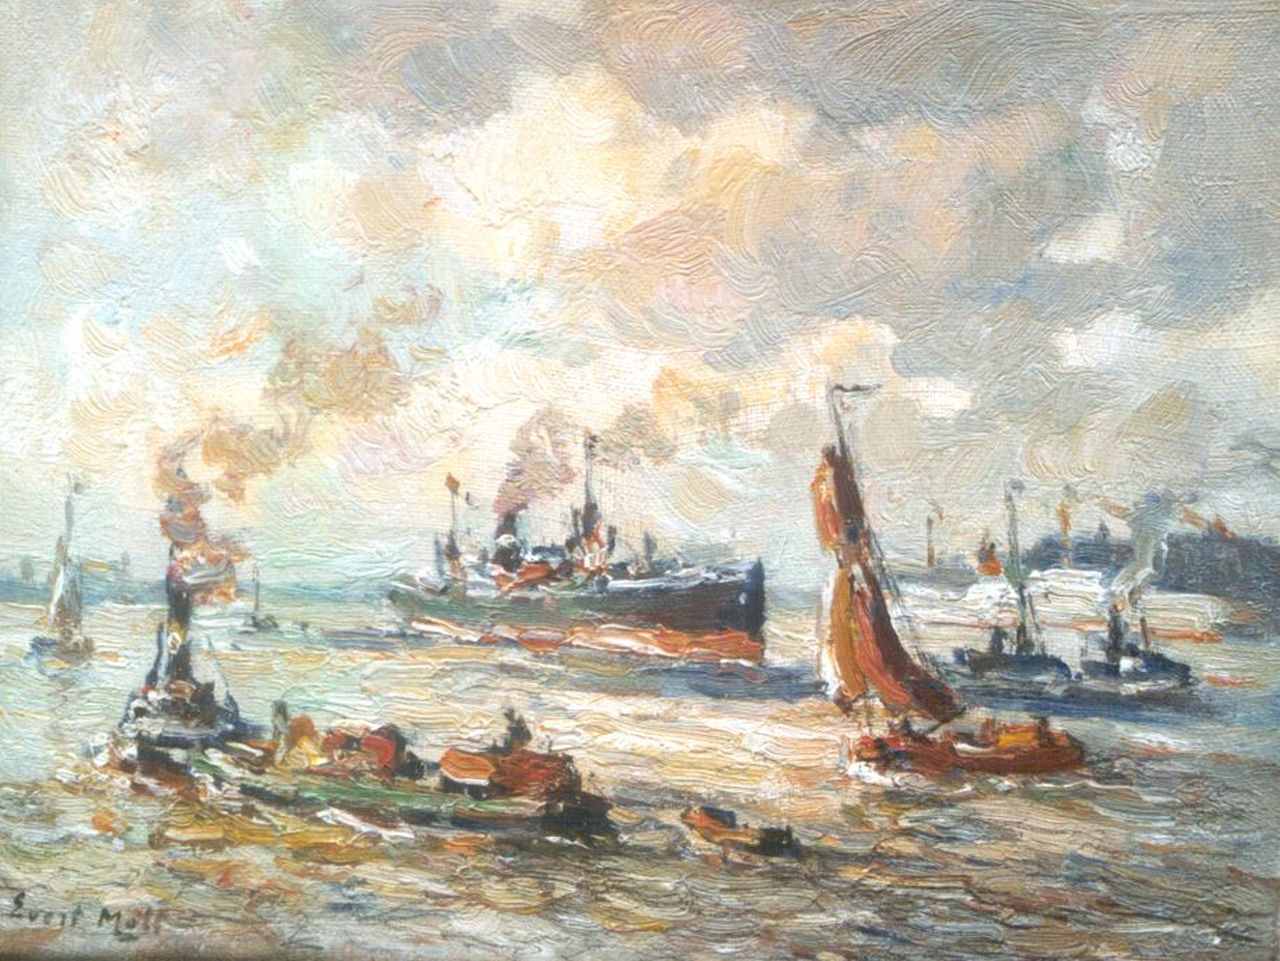 Moll E.  | Evert Moll, Ships in the harbour of Rotterdam, oil on canvas 19.3 x 25.4 cm, signed l.l.